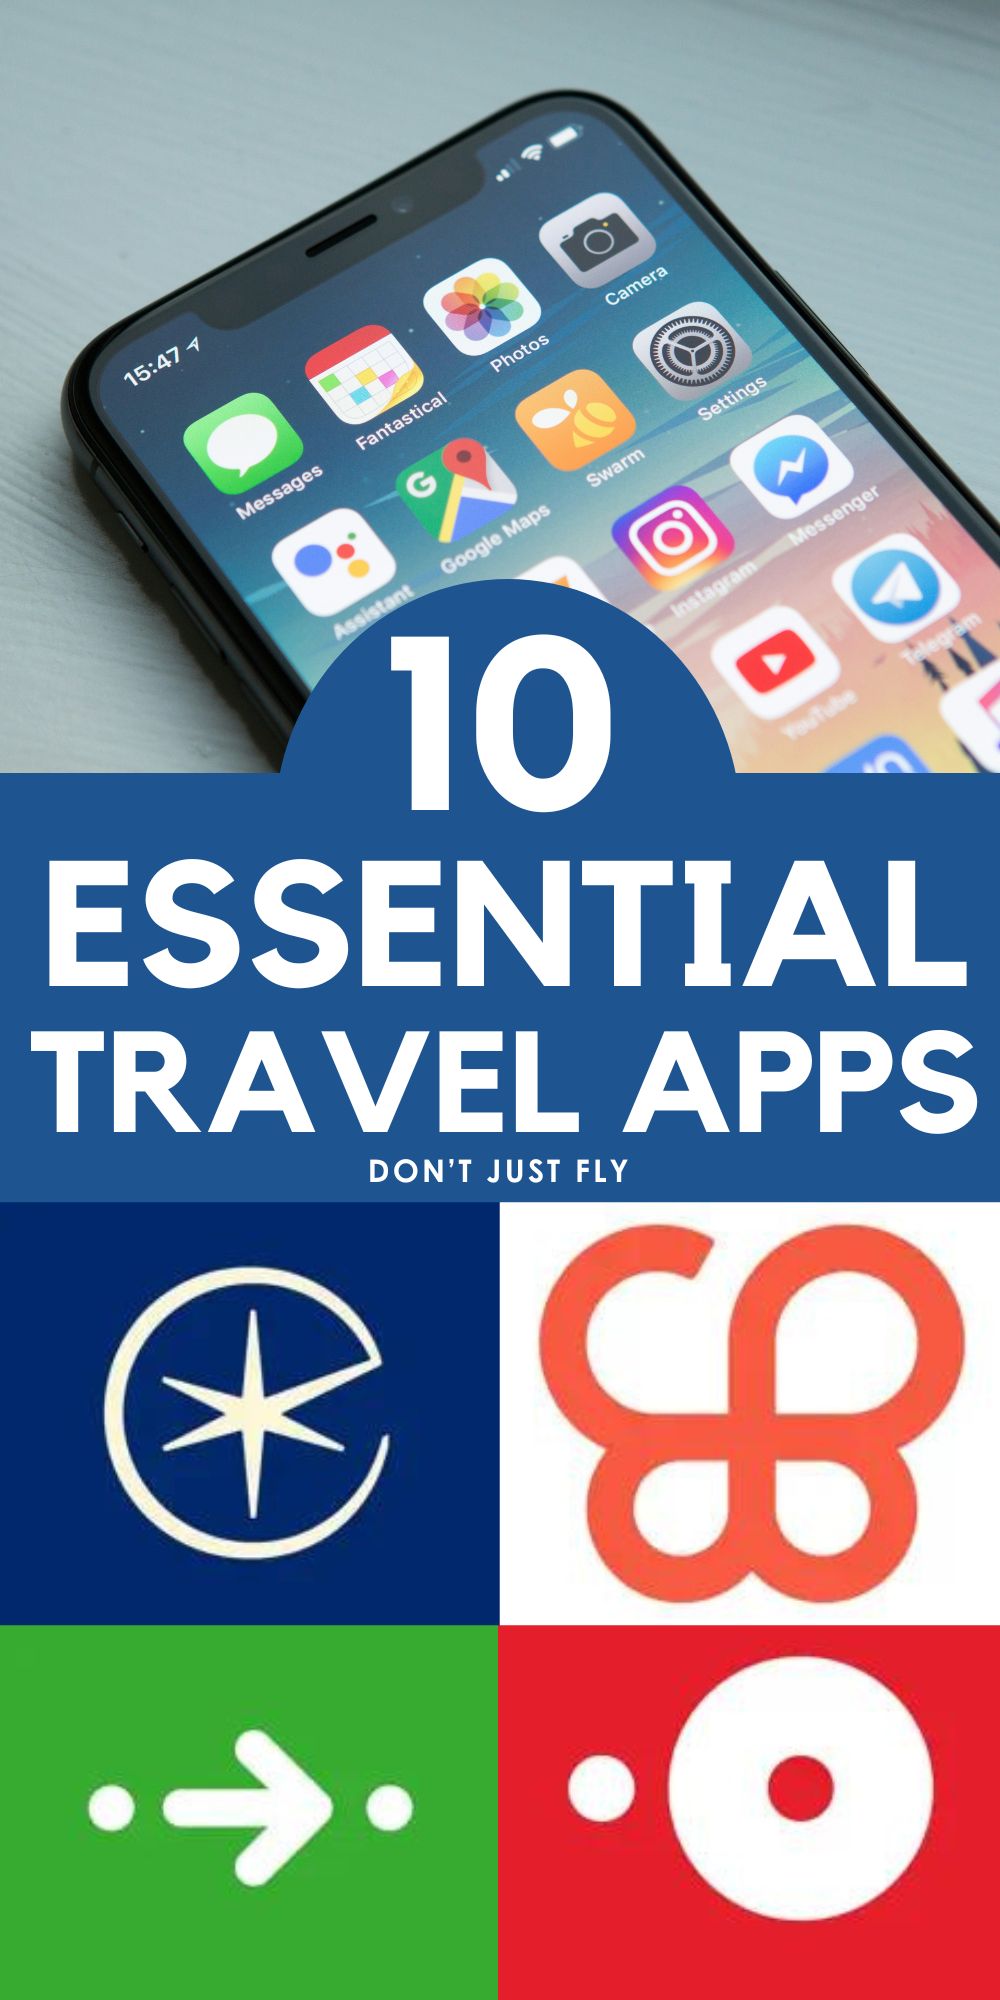 The photo collage shows several logos of travel apps next to an iPhone.